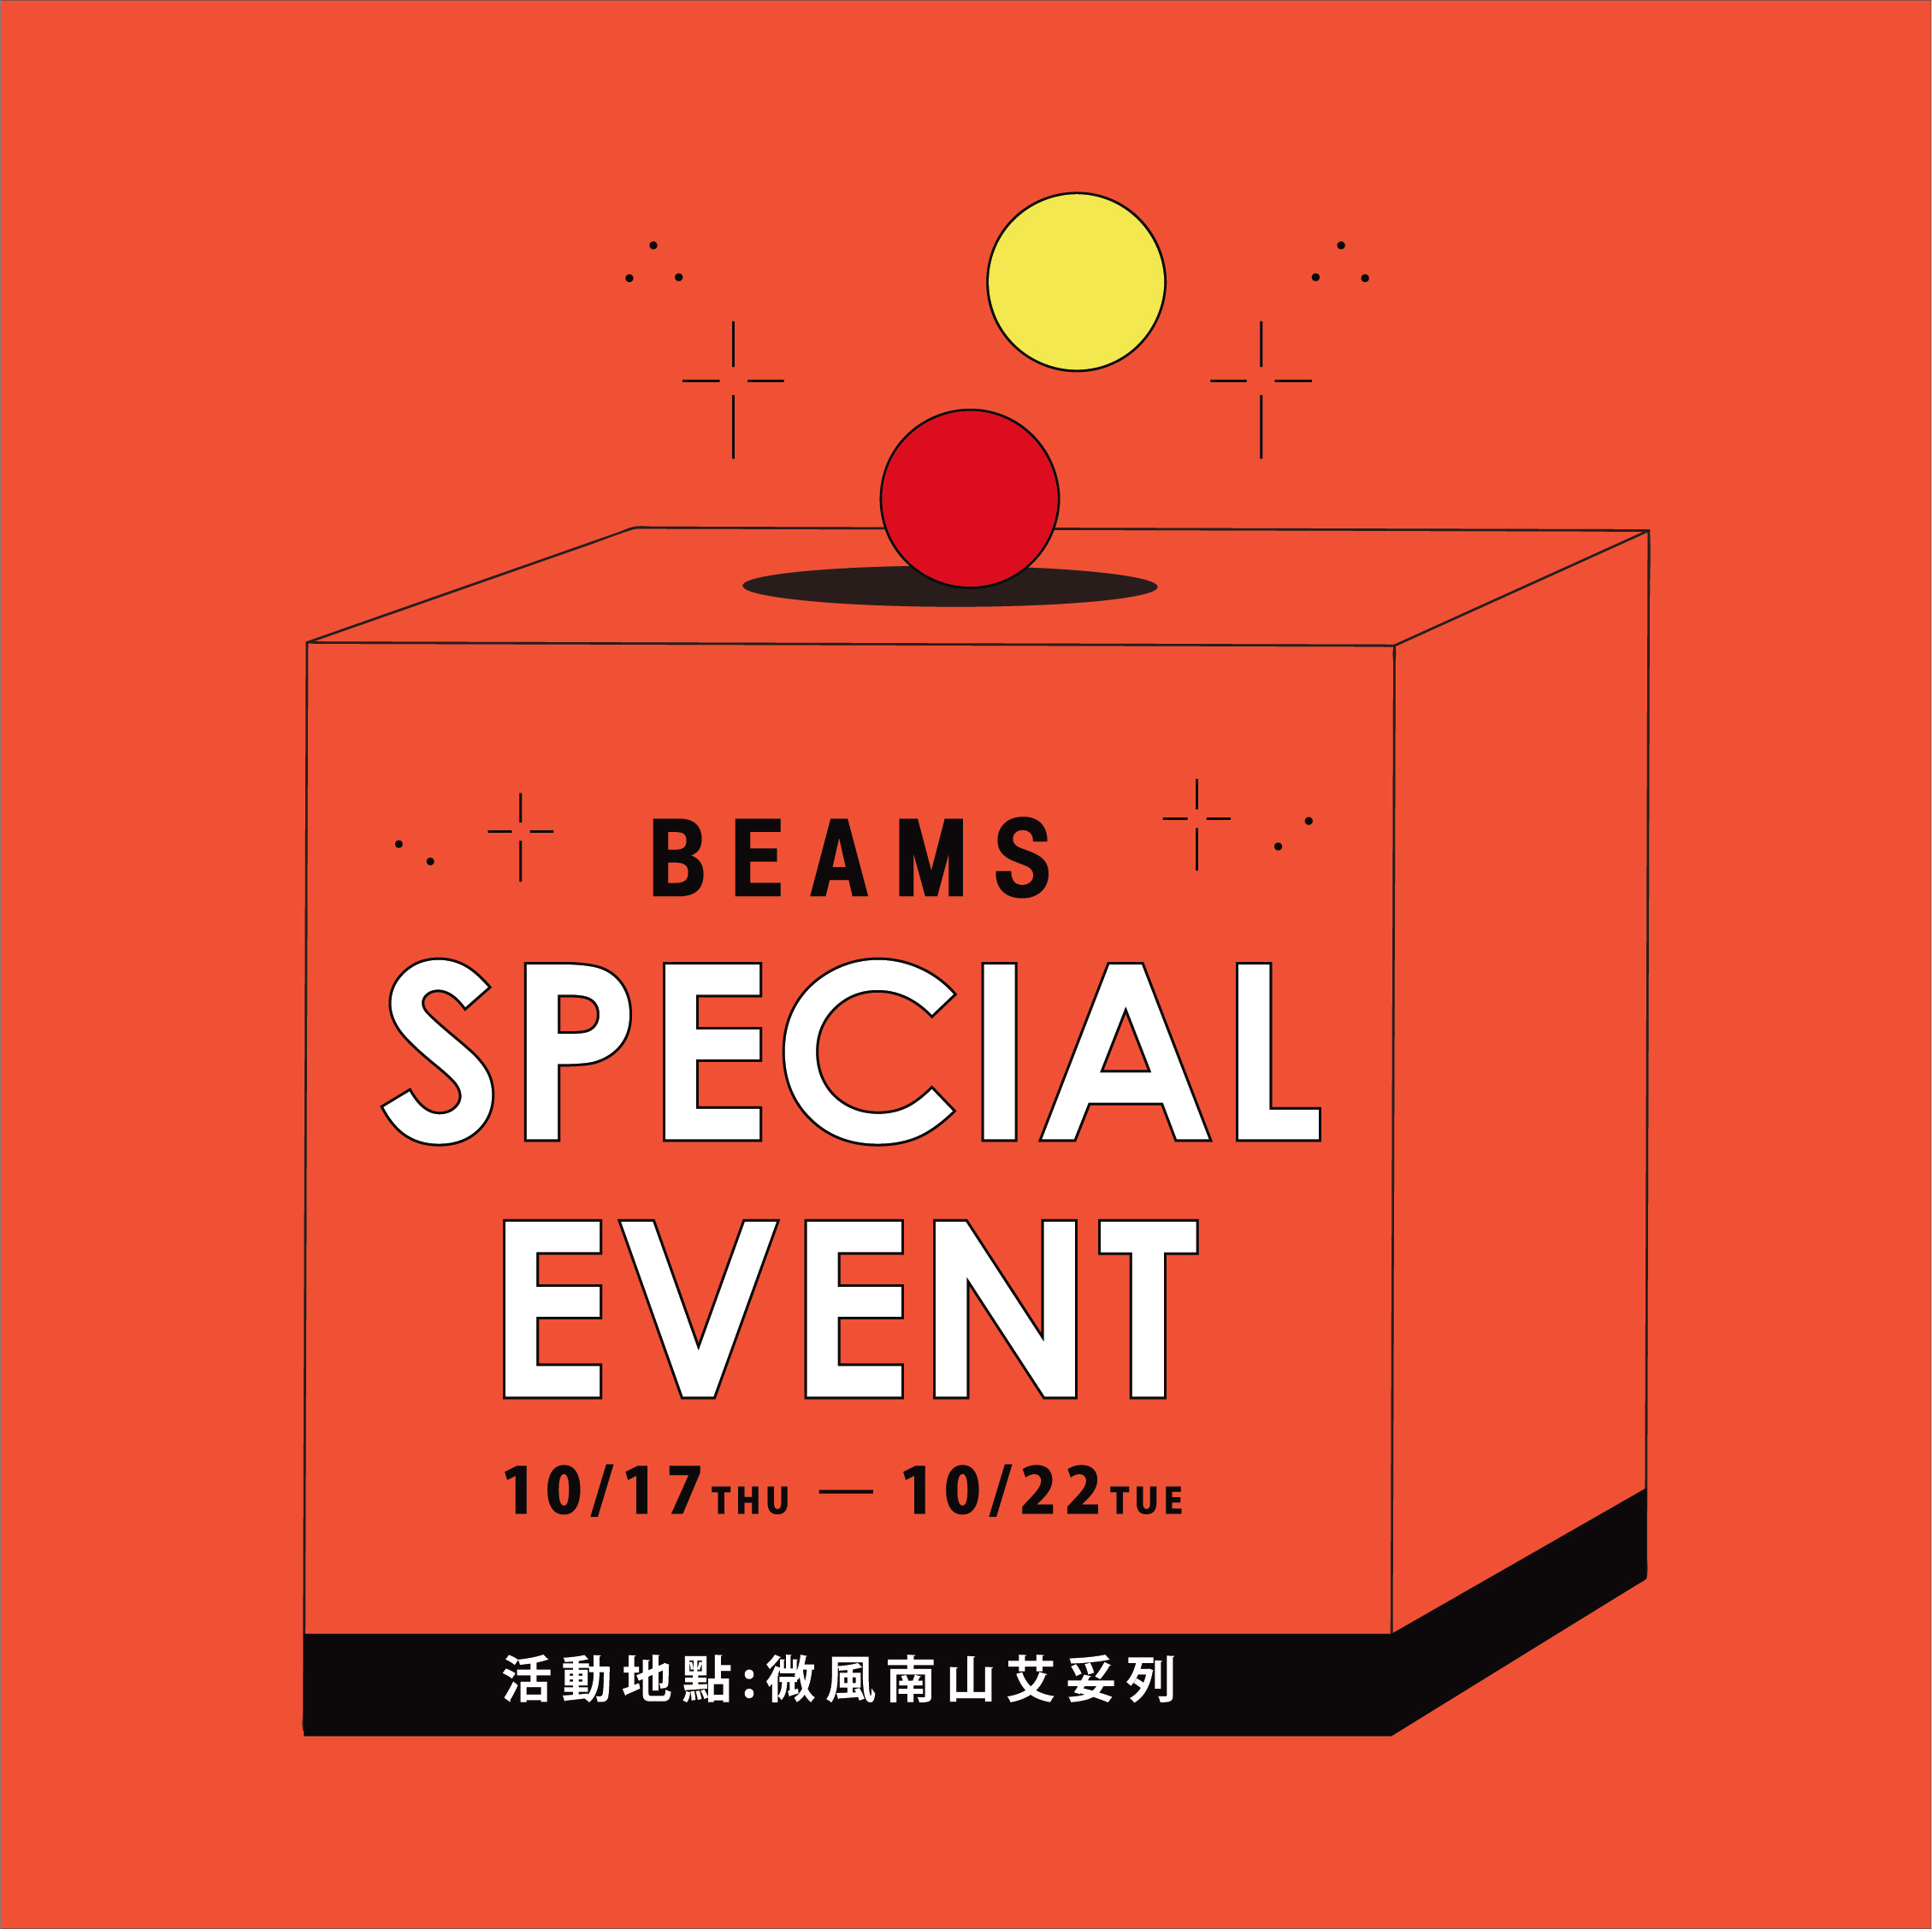 BEAMS SPECIAL EVENT at 微風南山艾妥列